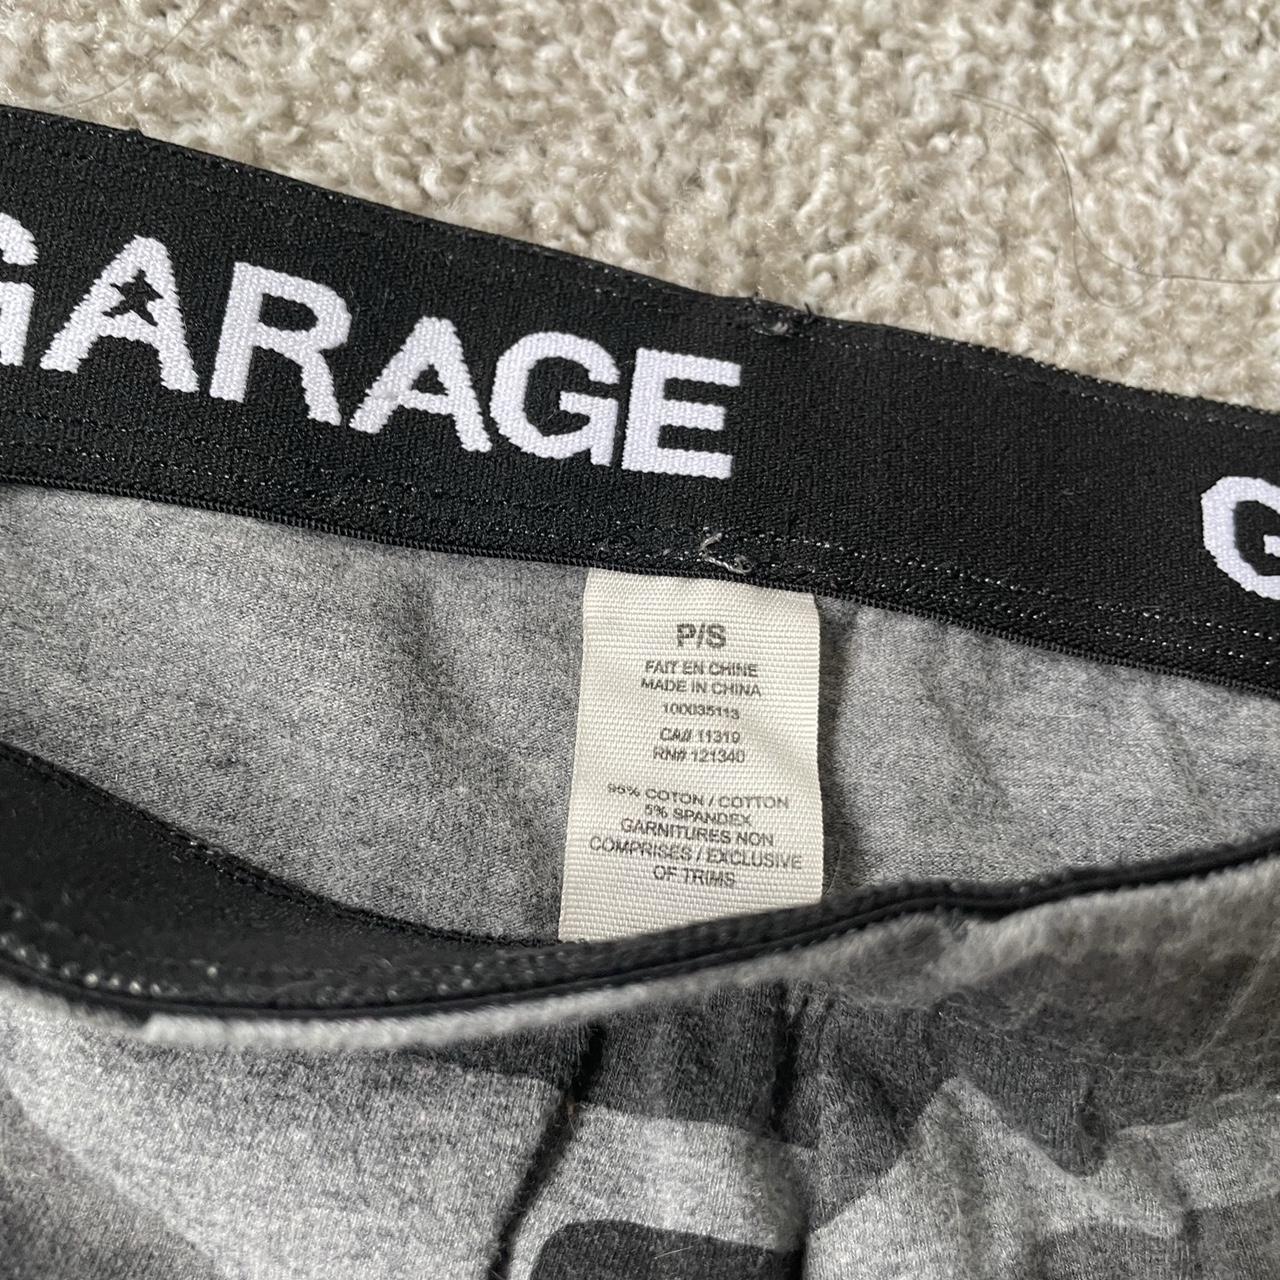 Gray, army print leggings from garage! These... - Depop